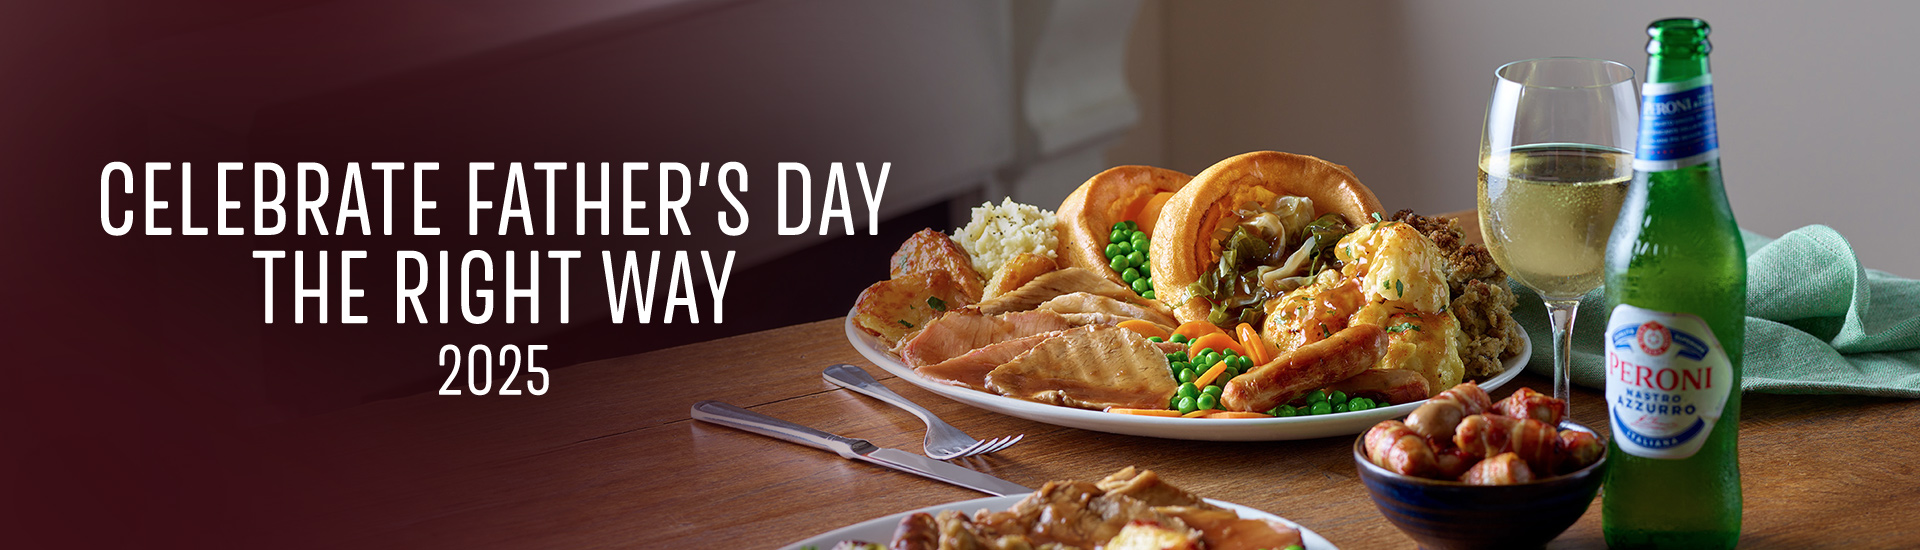 Father’s day carvery in Newbury